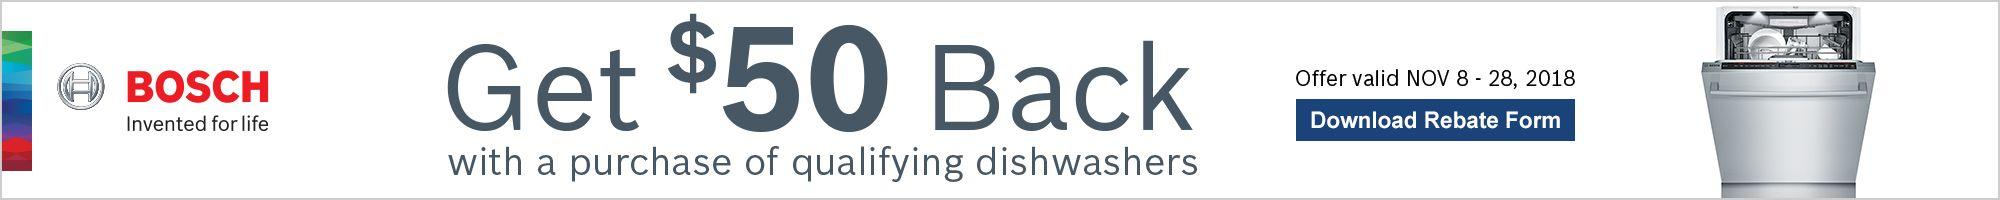 Bosch Invented for Life Logo - Bosch $50 on Purchase of DishwasherSouth Bend, IN